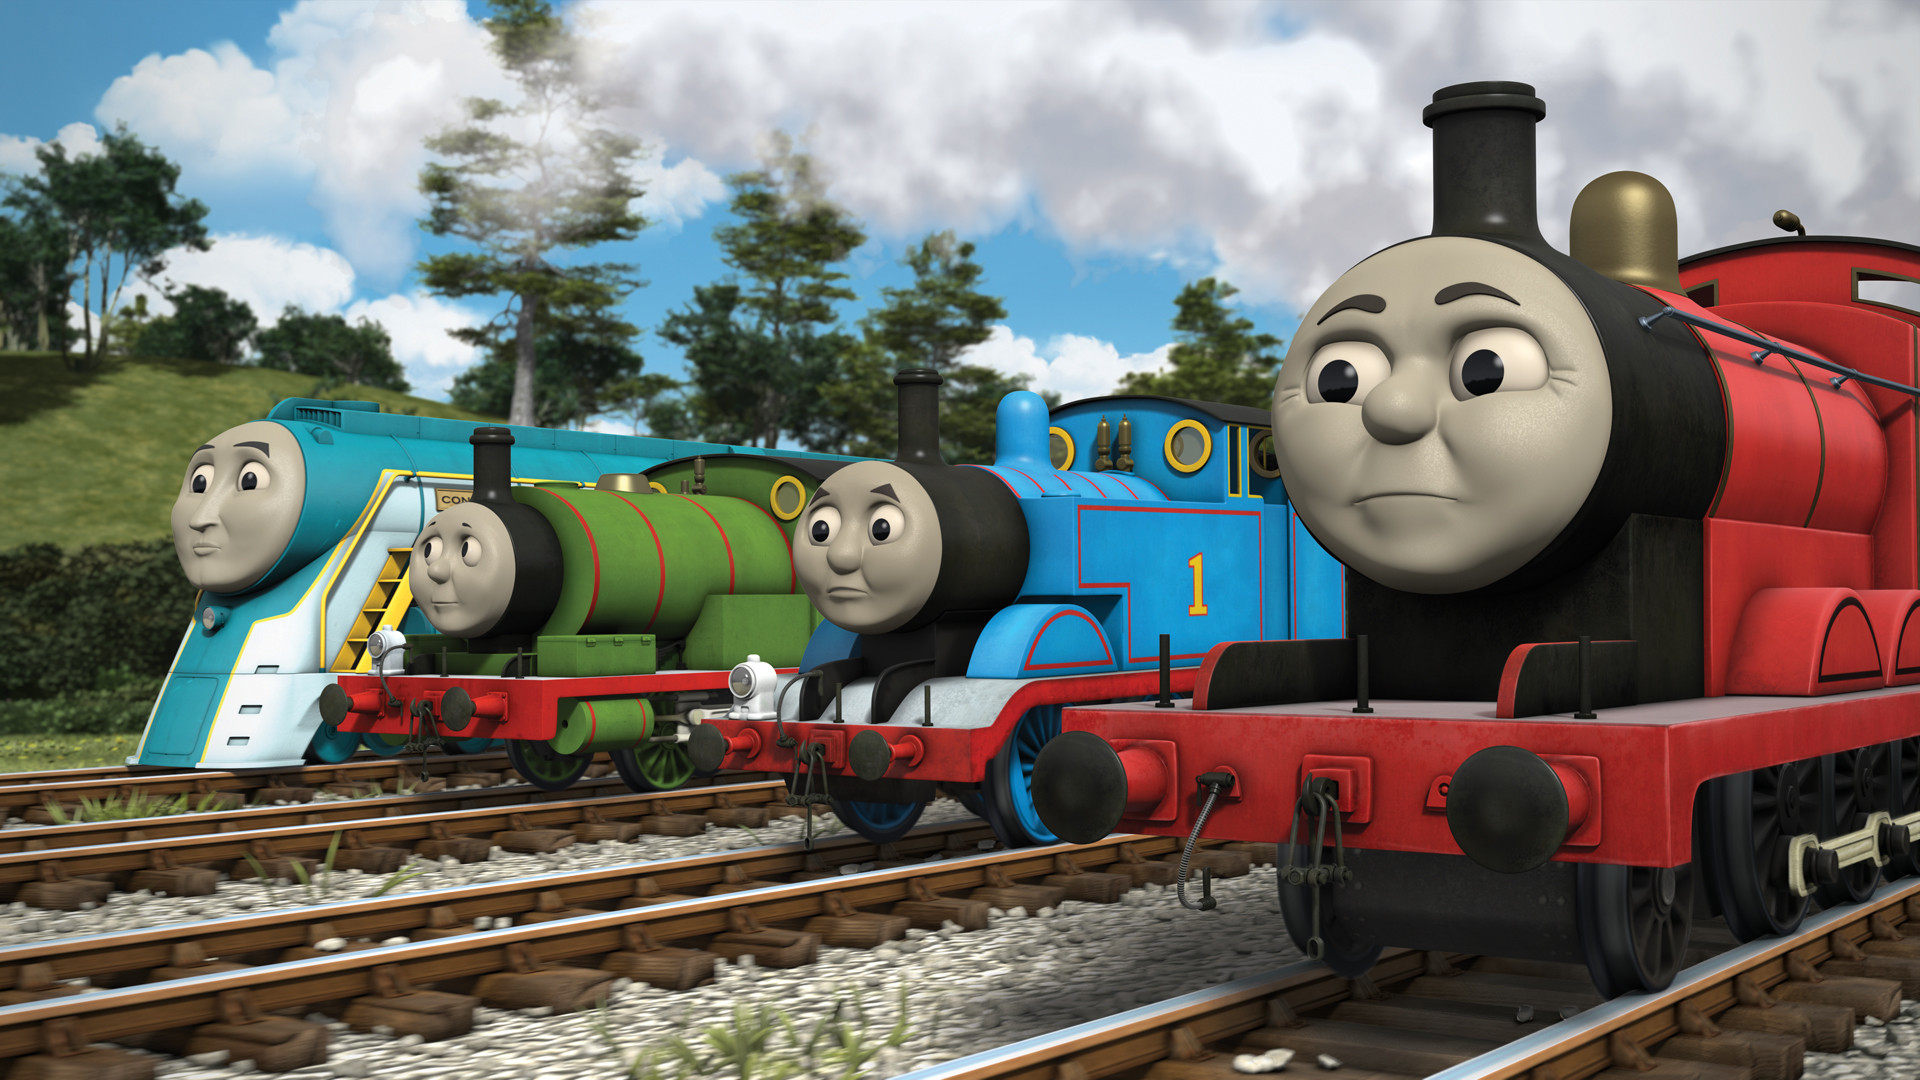 HD Thomas And Friends Wallpapers and Photos | HD Cartoons Wallpapers